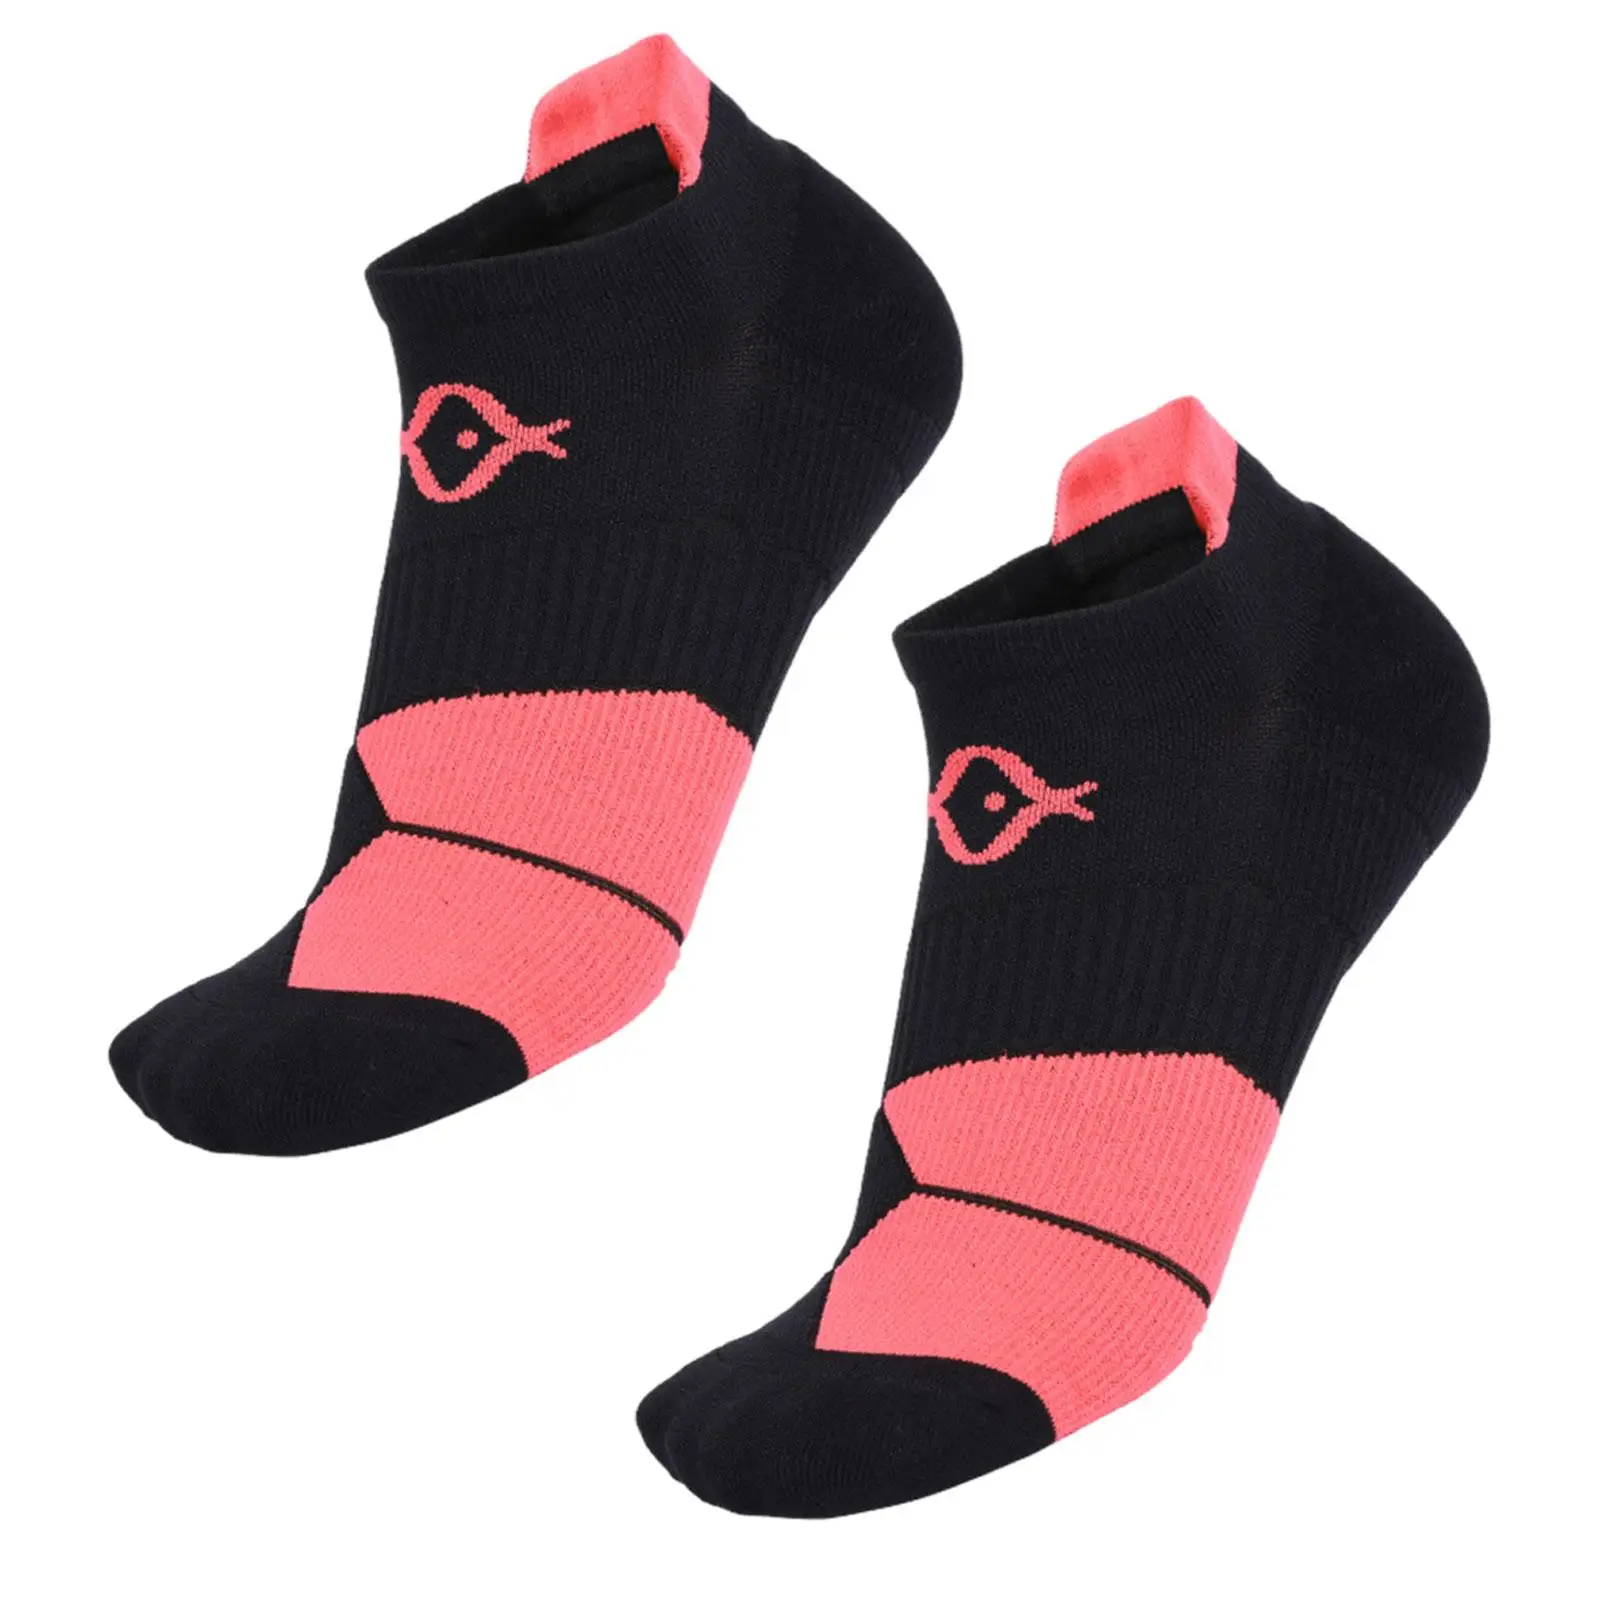 1 Pair Women Short Socks Soft Nylon Warm Socks Low Cut Sports Socks for Outdoor Activities Daily Wear Sports Cold Weather Hiking